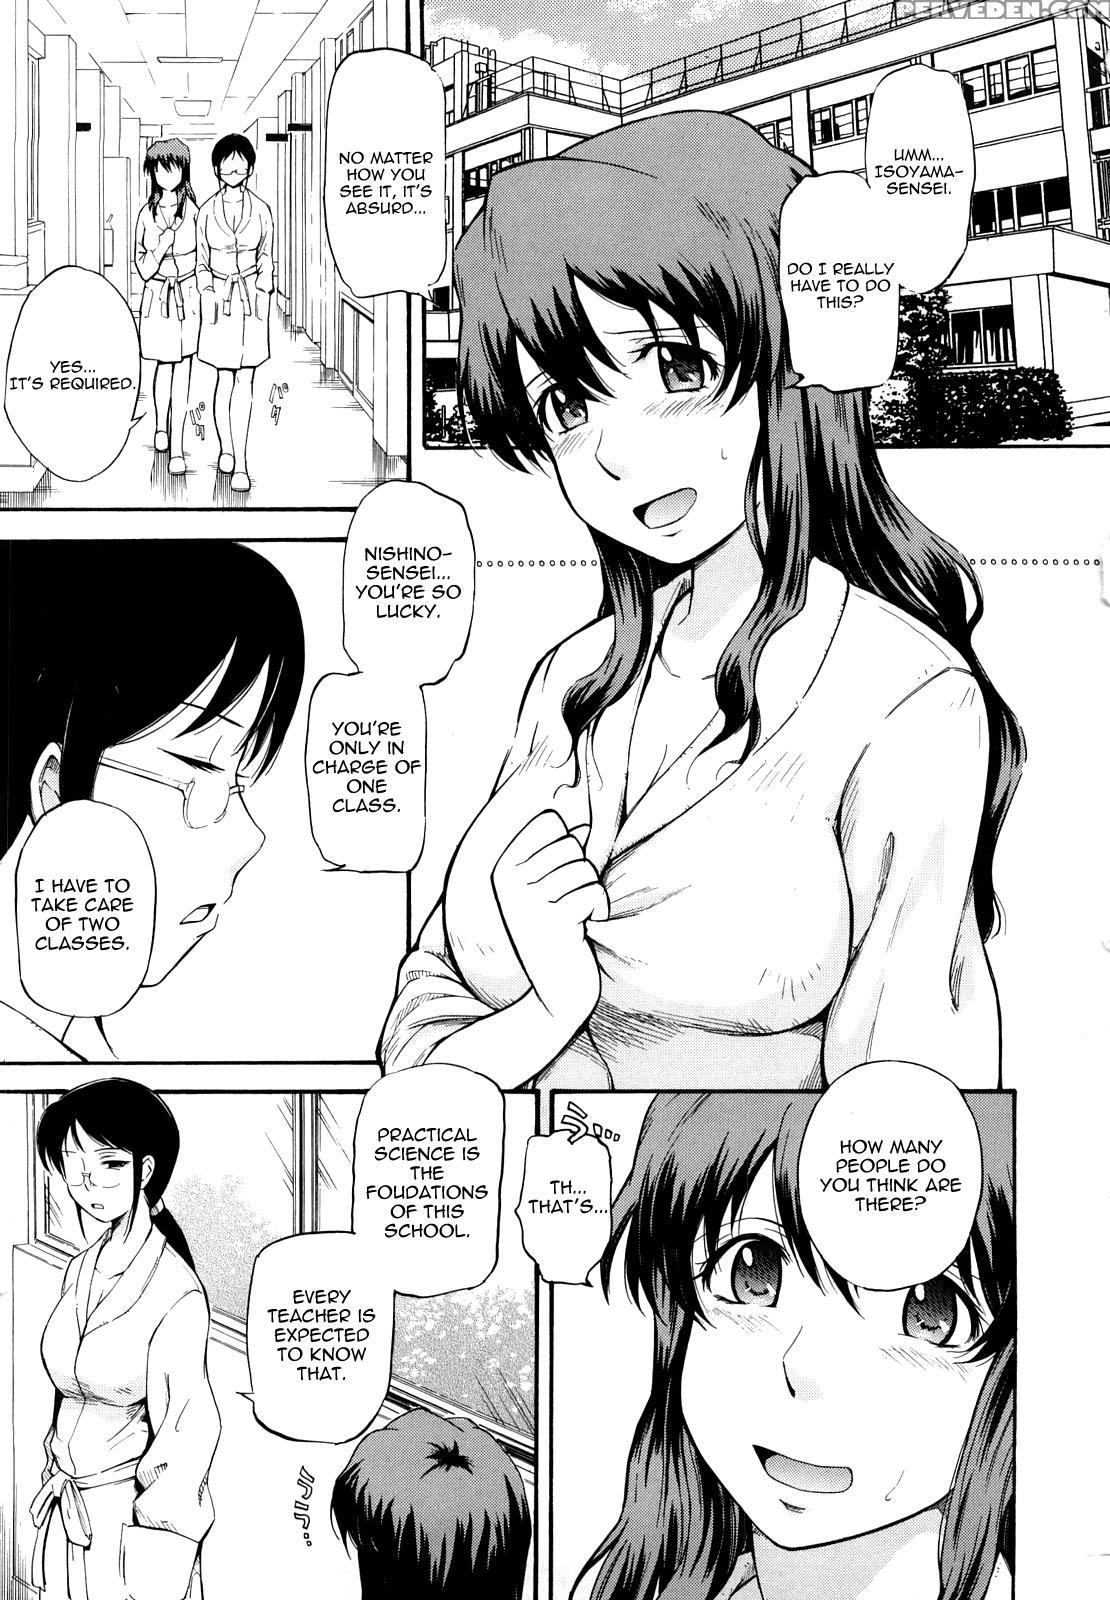 The Right Way To Teach Sex Education Original Work 1 Manga Page 1 Read Manga The Right Way